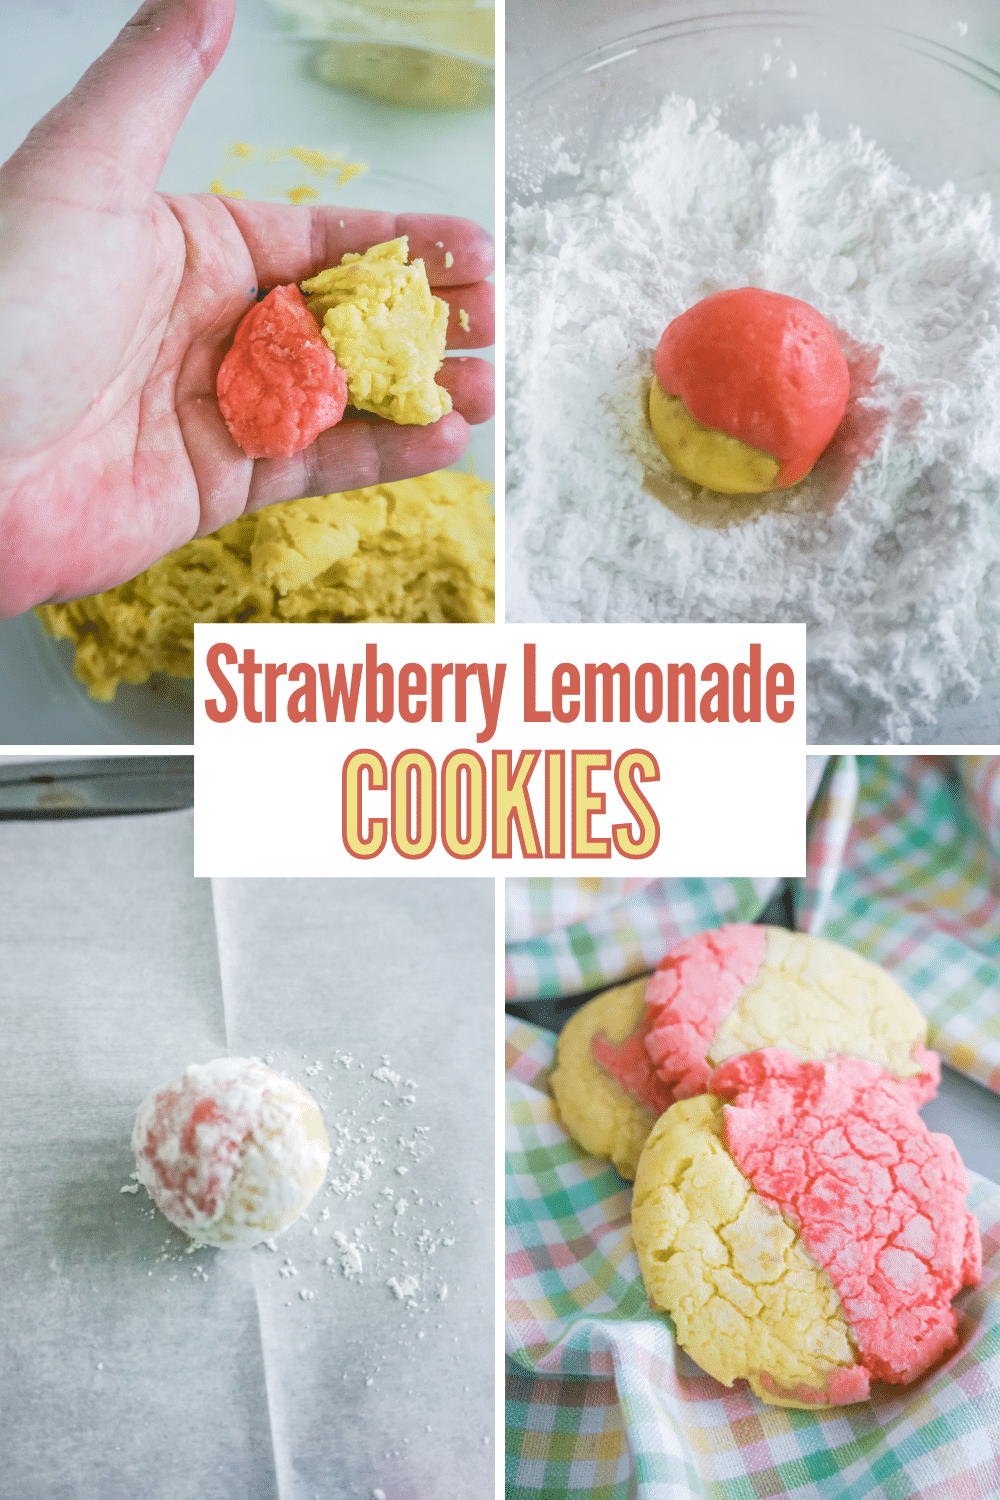 Strawberry Lemonade Crinkle Cookies are the cookies that you need in your life. The two-toned cookies are beautiful to look at! #crinklecookies #cookies #strawberrylemonade #recipe via @wondermomwannab